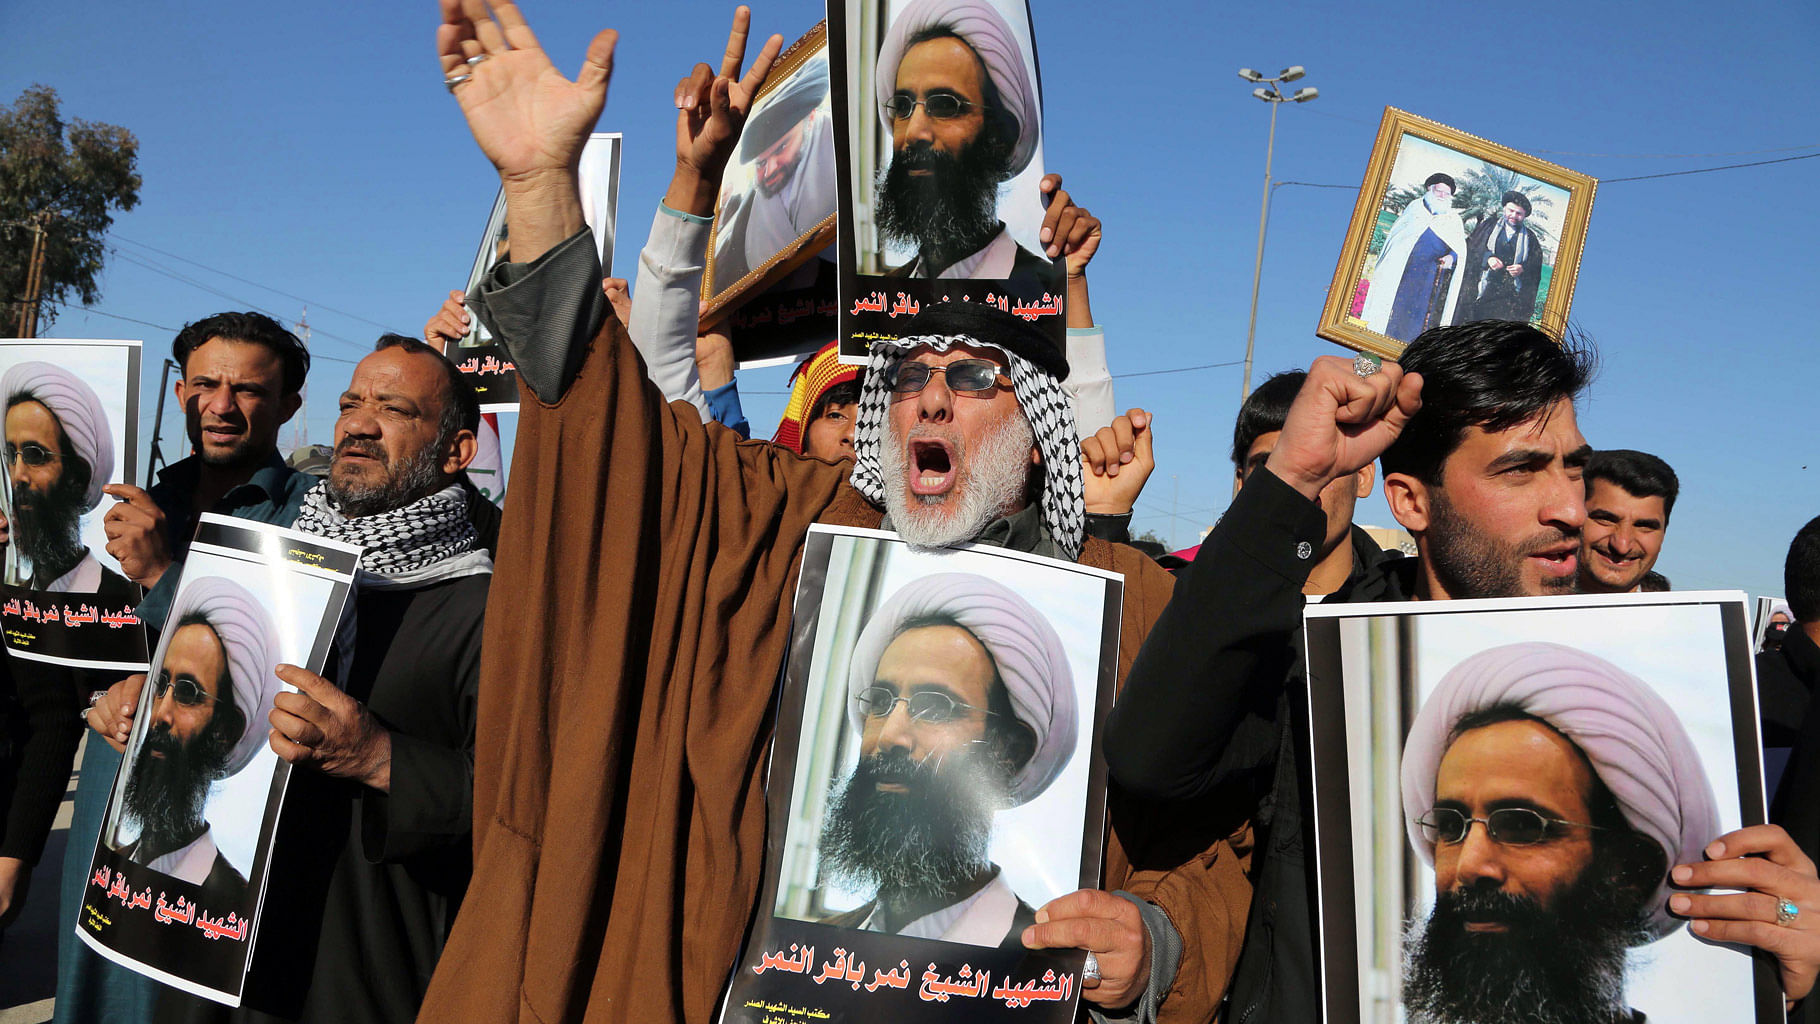  Iraqi Shia protesters chant slogans against the Saudi Arabian government during a demonstration in Najaf,  Iraq,  January 4, 2016. (Photo: Reuters)